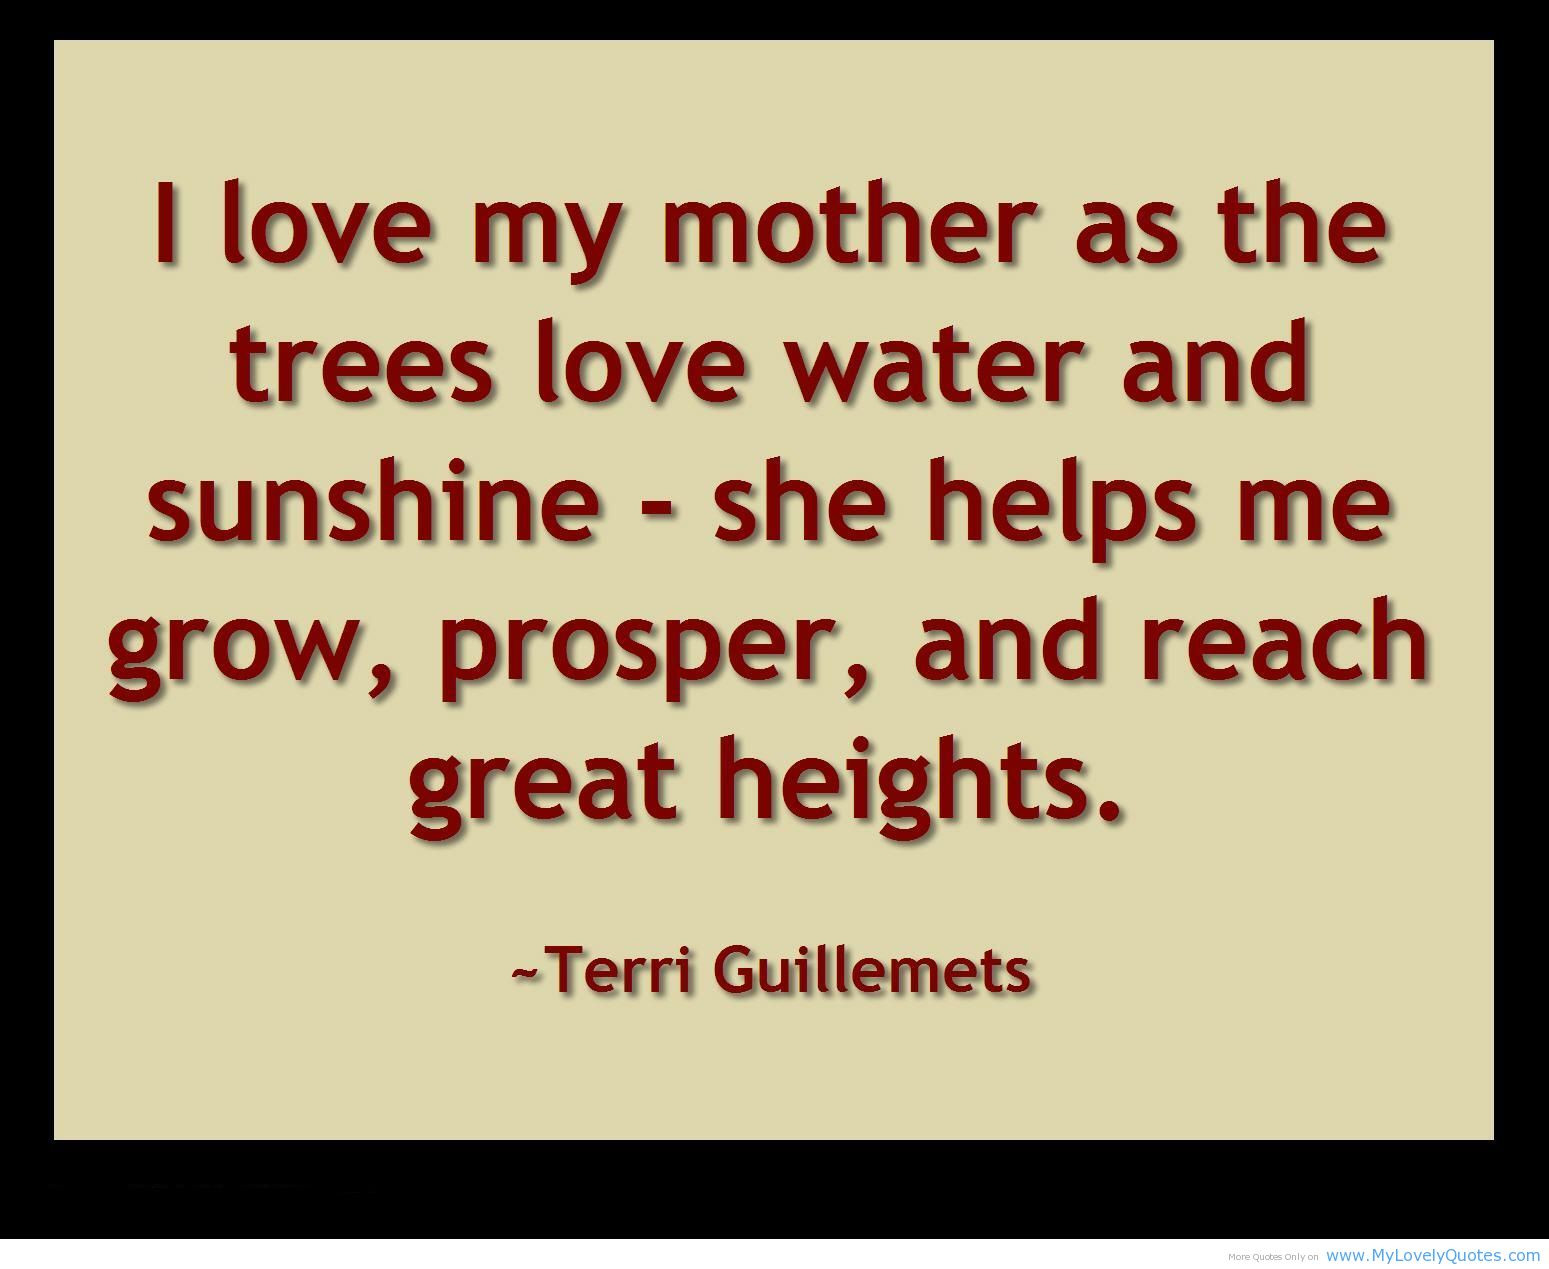 Quotes On Mothers Love
 Quotes About Mothers Love QuotesGram